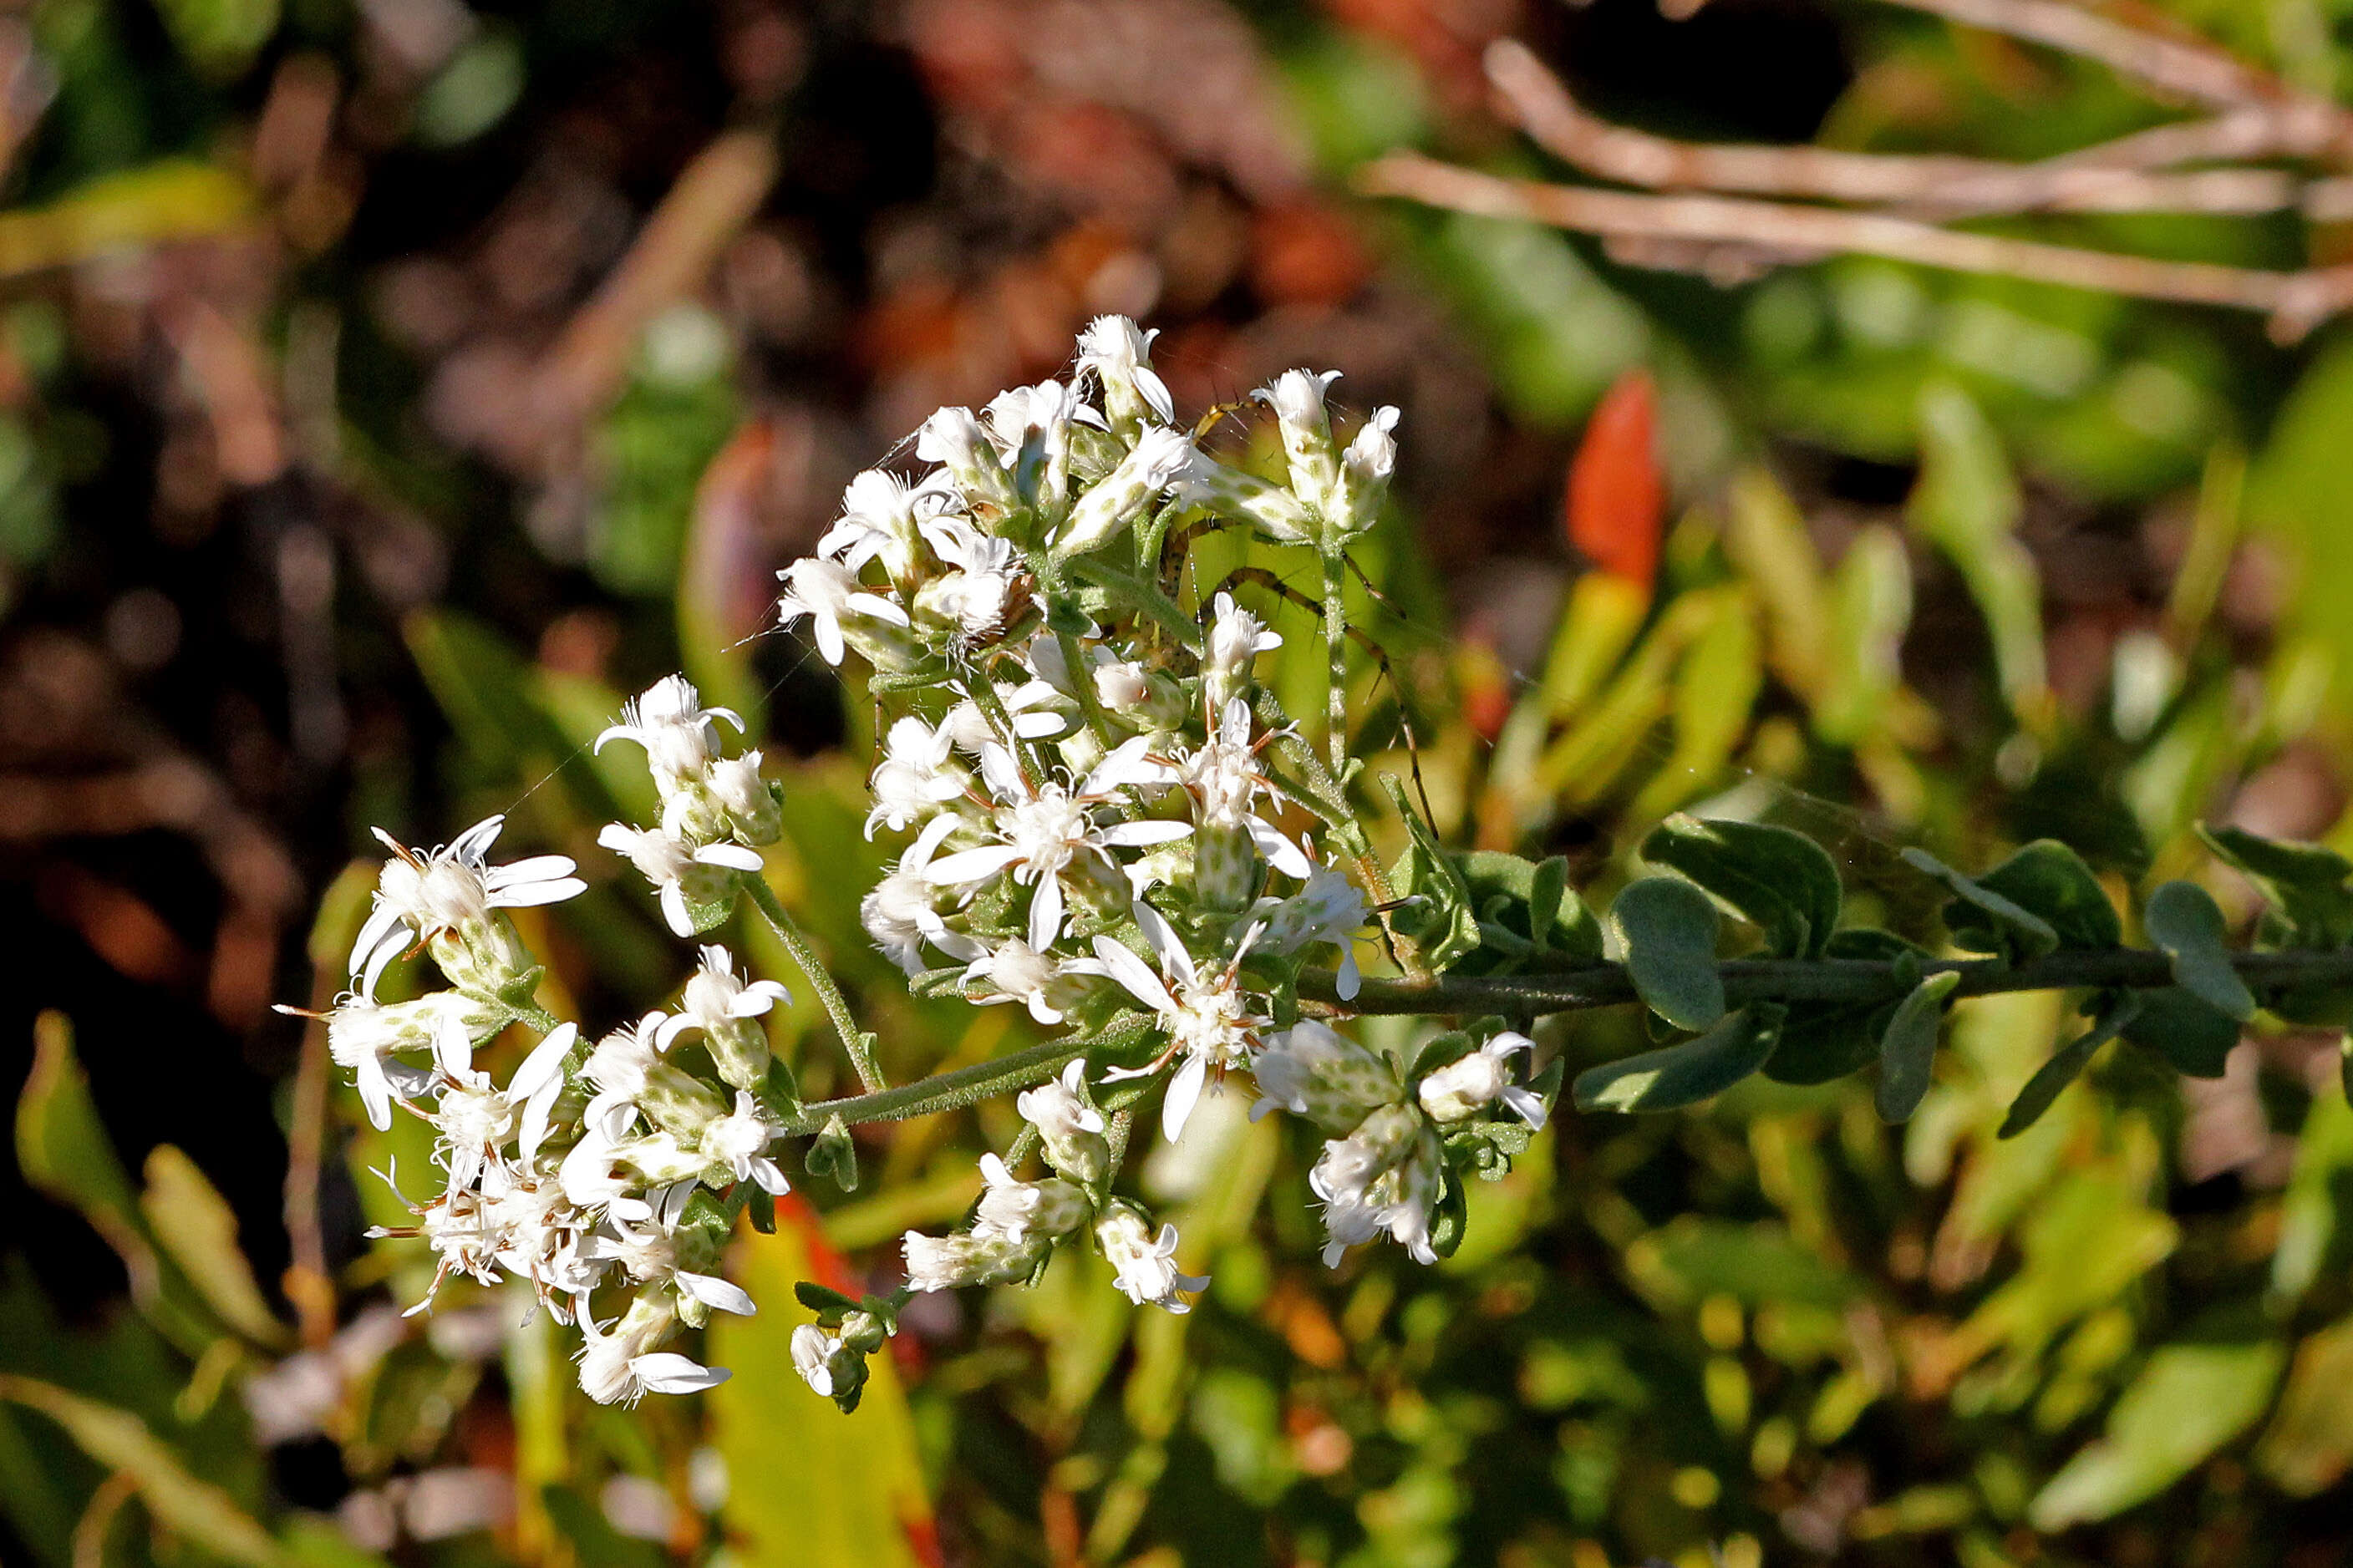 Image of whitetop aster